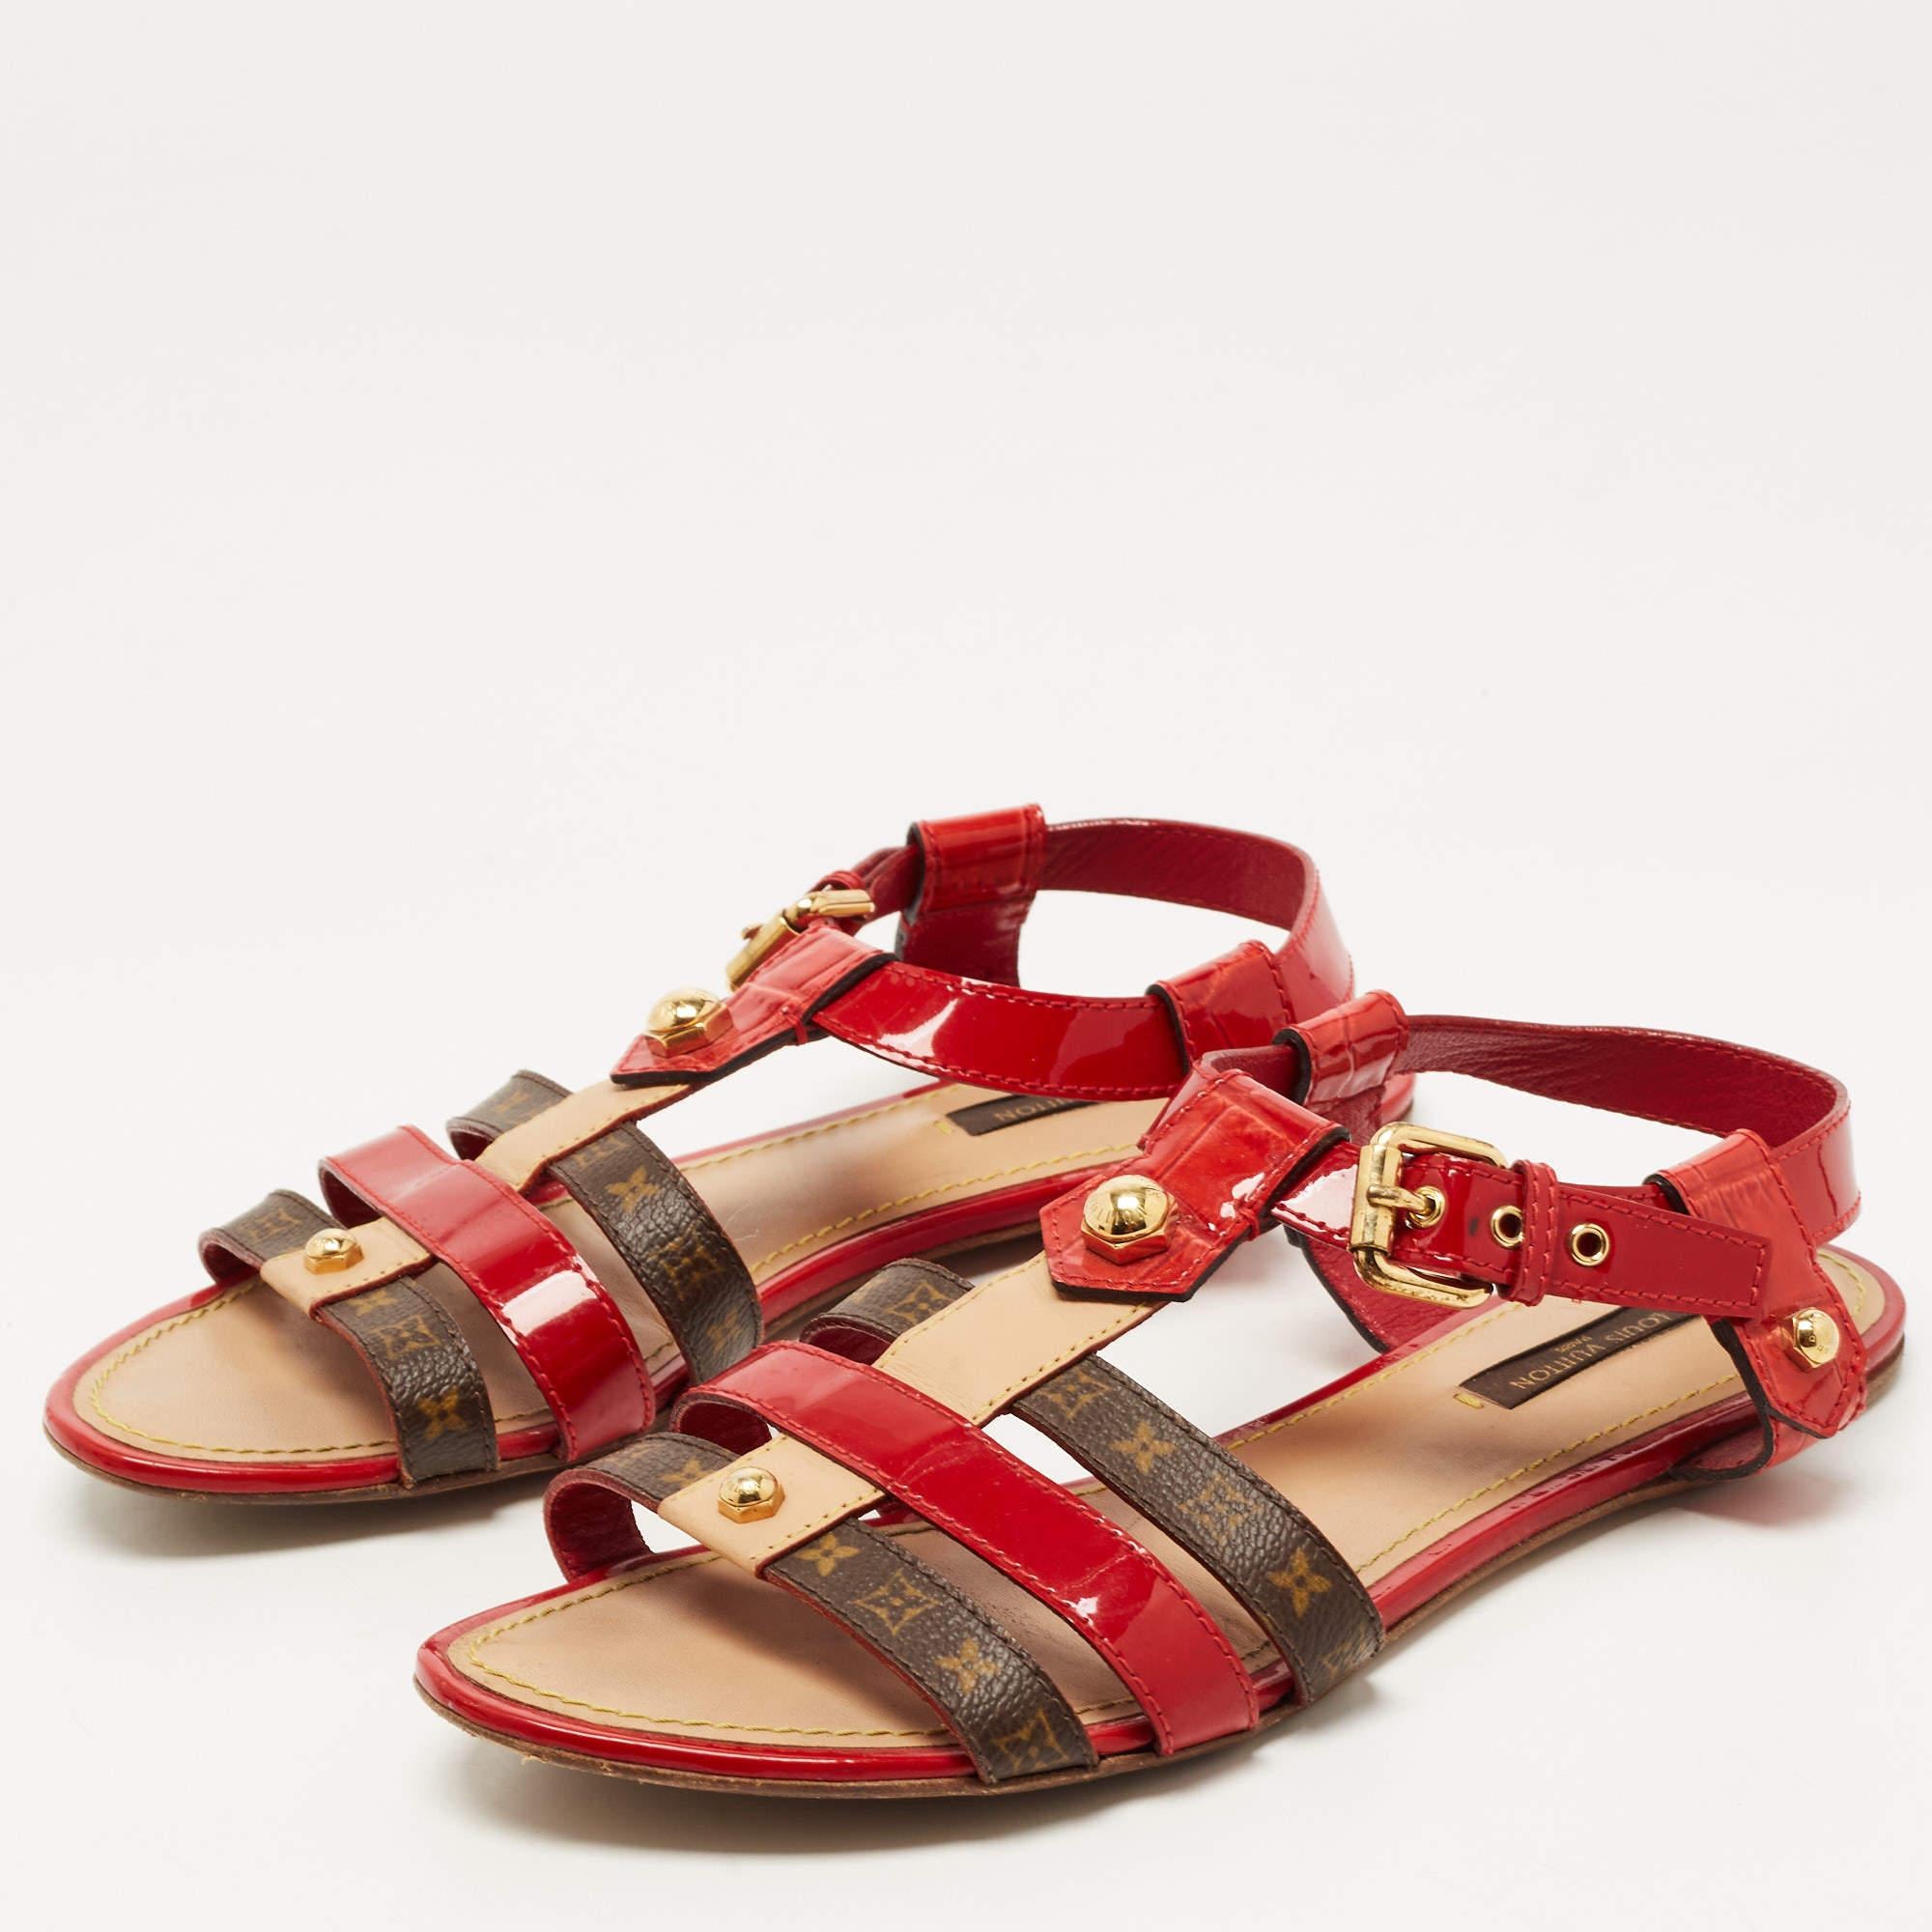 Louis Vuitton Red/Brown Patent Leather and Monogram Canvas Flat Sandals Size 37 2